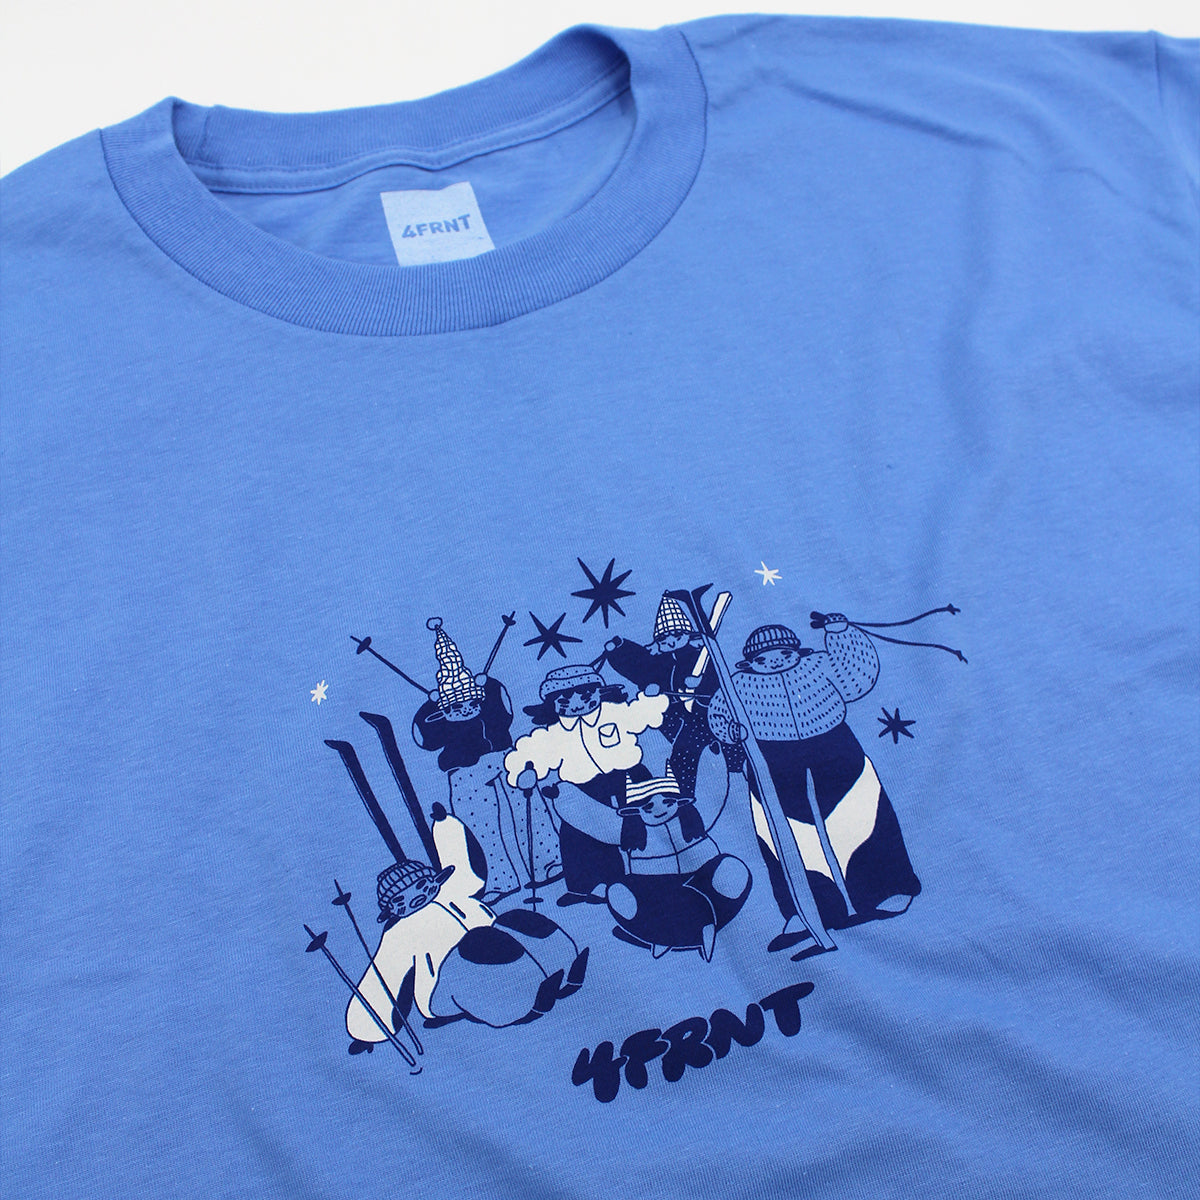 blue ski gang t shirt with design by nessa front detail view